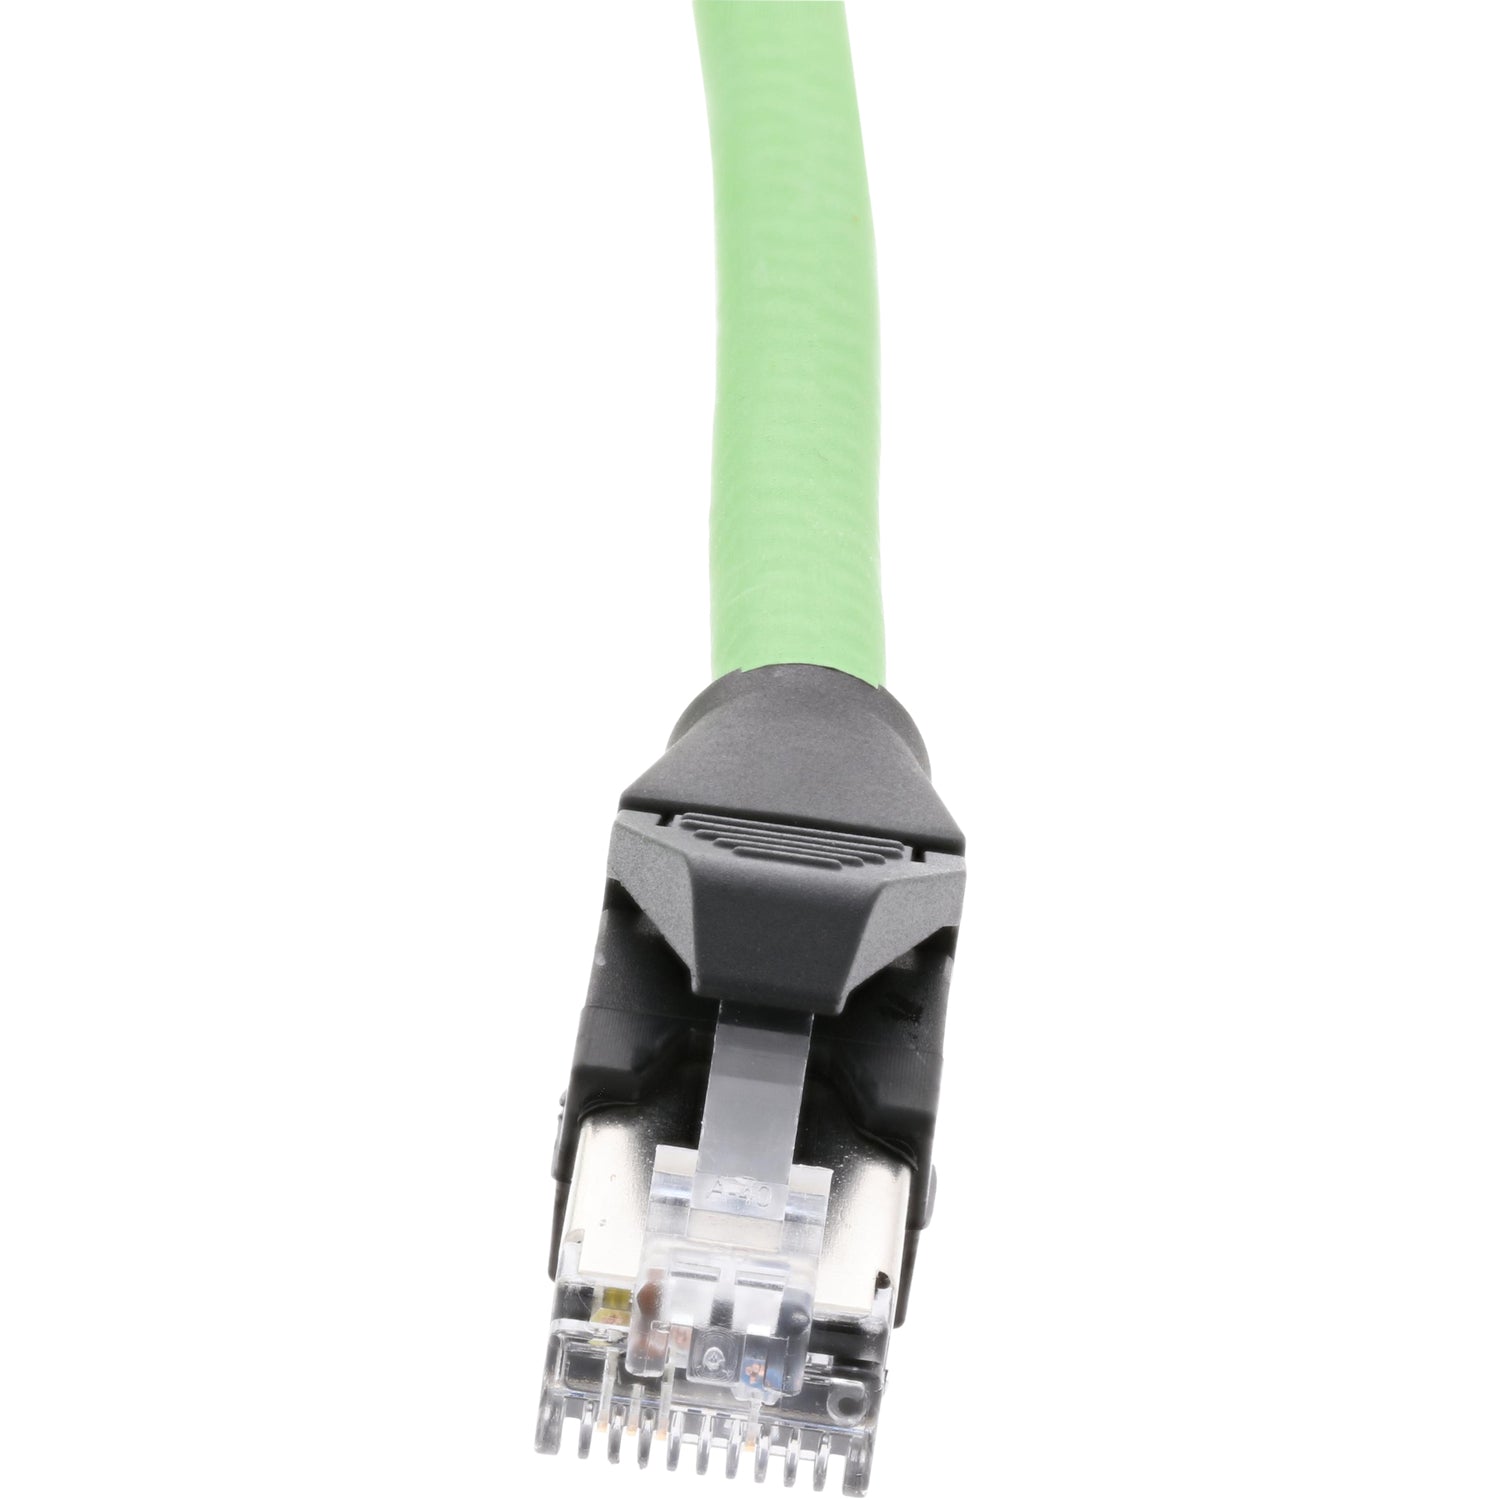 Green connector cable with RH45 plug on white background. 